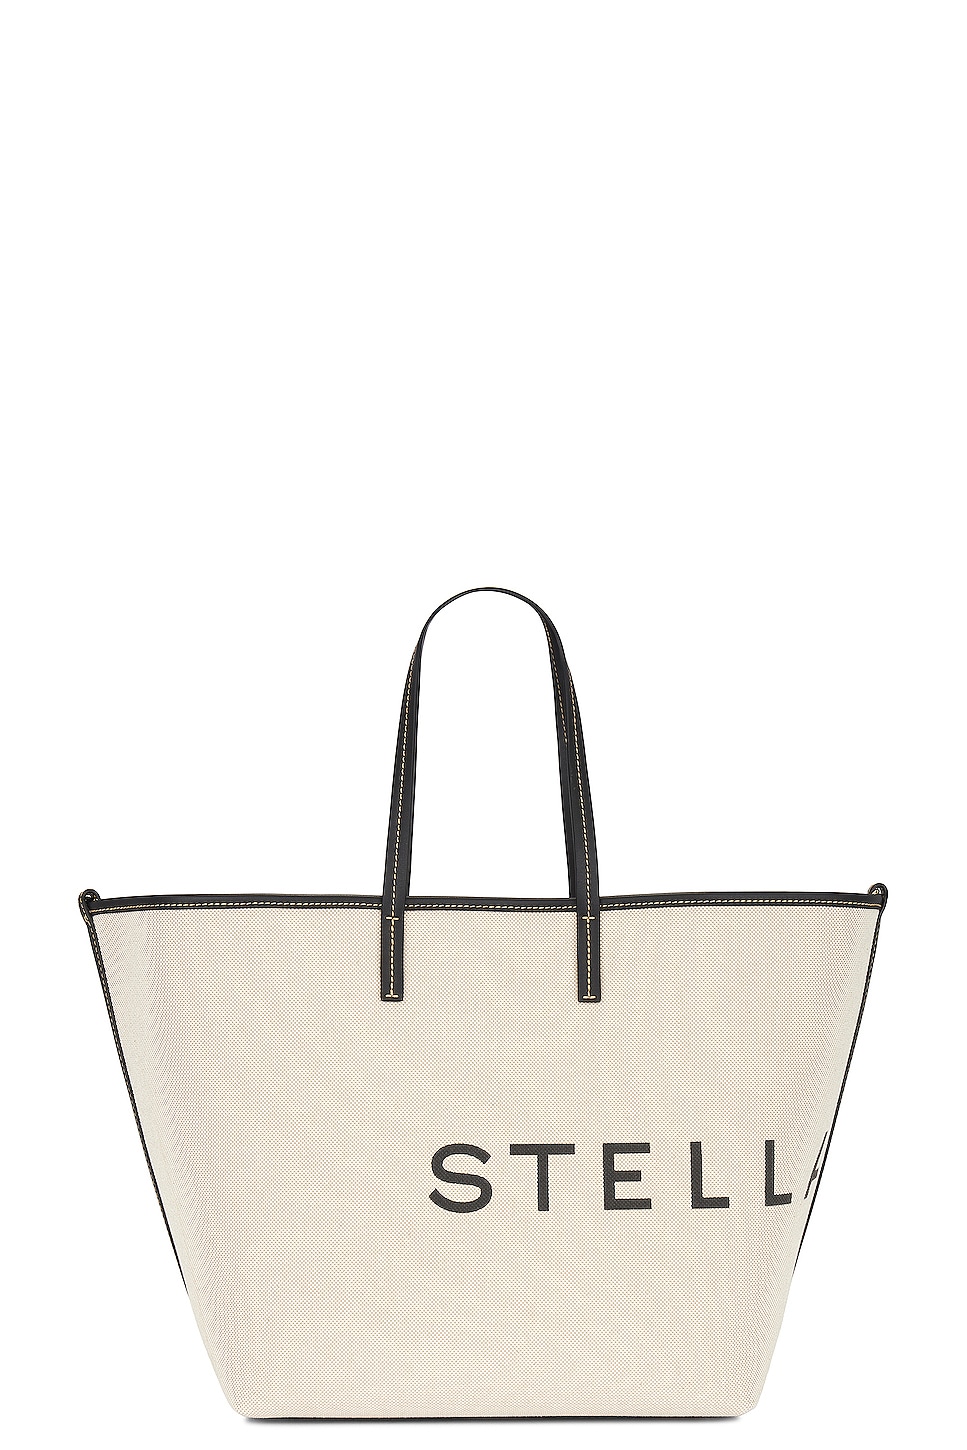 Salt And Pepper Canvas Tote Bag in White